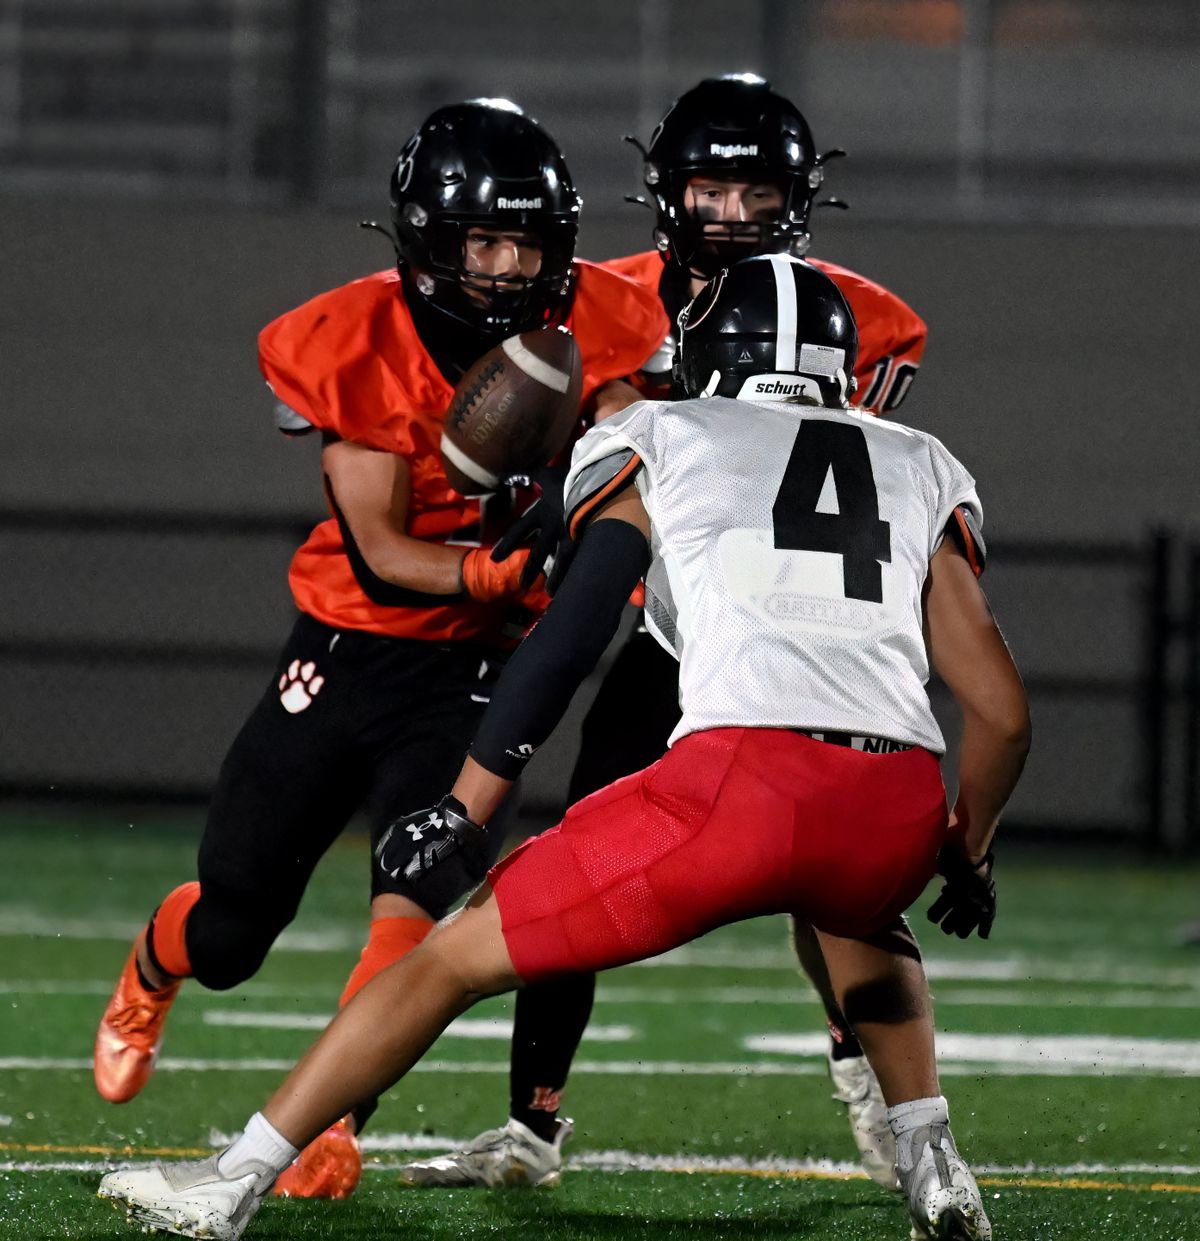 Lewis and Clark running back Gentz Hilburn fumbles the ball and Cheney recovers during first quarter of a high school football game, Thursday, September 29, 2022, at Union Stadium in Mead.  (COLIN MULVANY/THE SPOKESMAN-REVIEW)